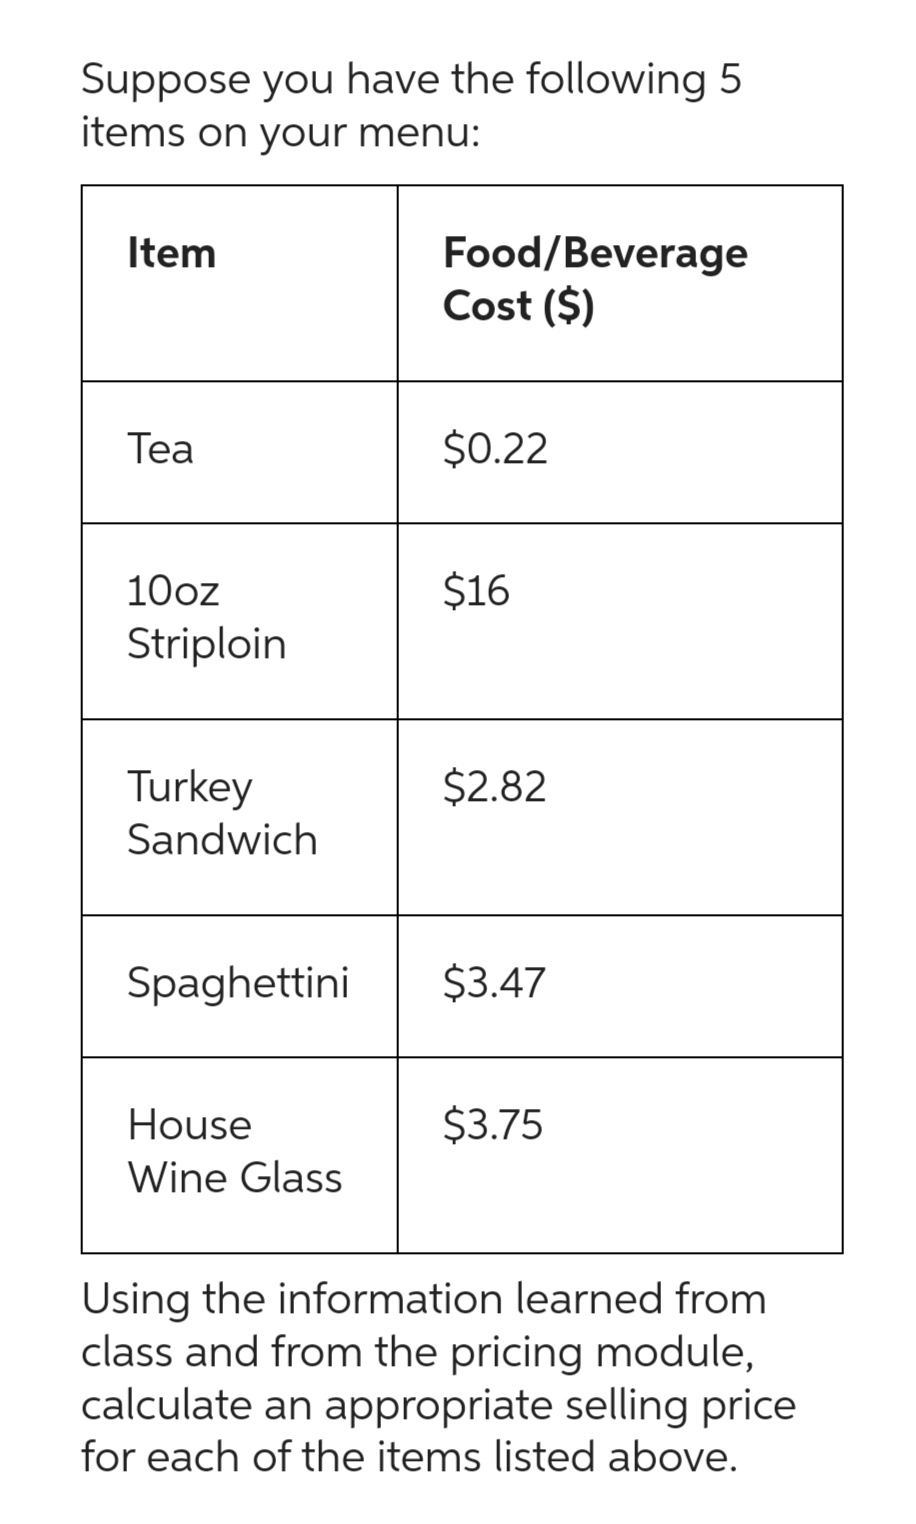 Suppose you have the following 5
items on your menu:
Item
Tea
10oz
Striploin
Turkey
Sandwich
Spaghettini
House
Wine Glass
Food/Beverage
Cost ($)
$0.22
$16
$2.82
$3.47
$3.75
Using the information learned from
class and from the pricing module,
calculate an appropriate selling price
for each of the items listed above.